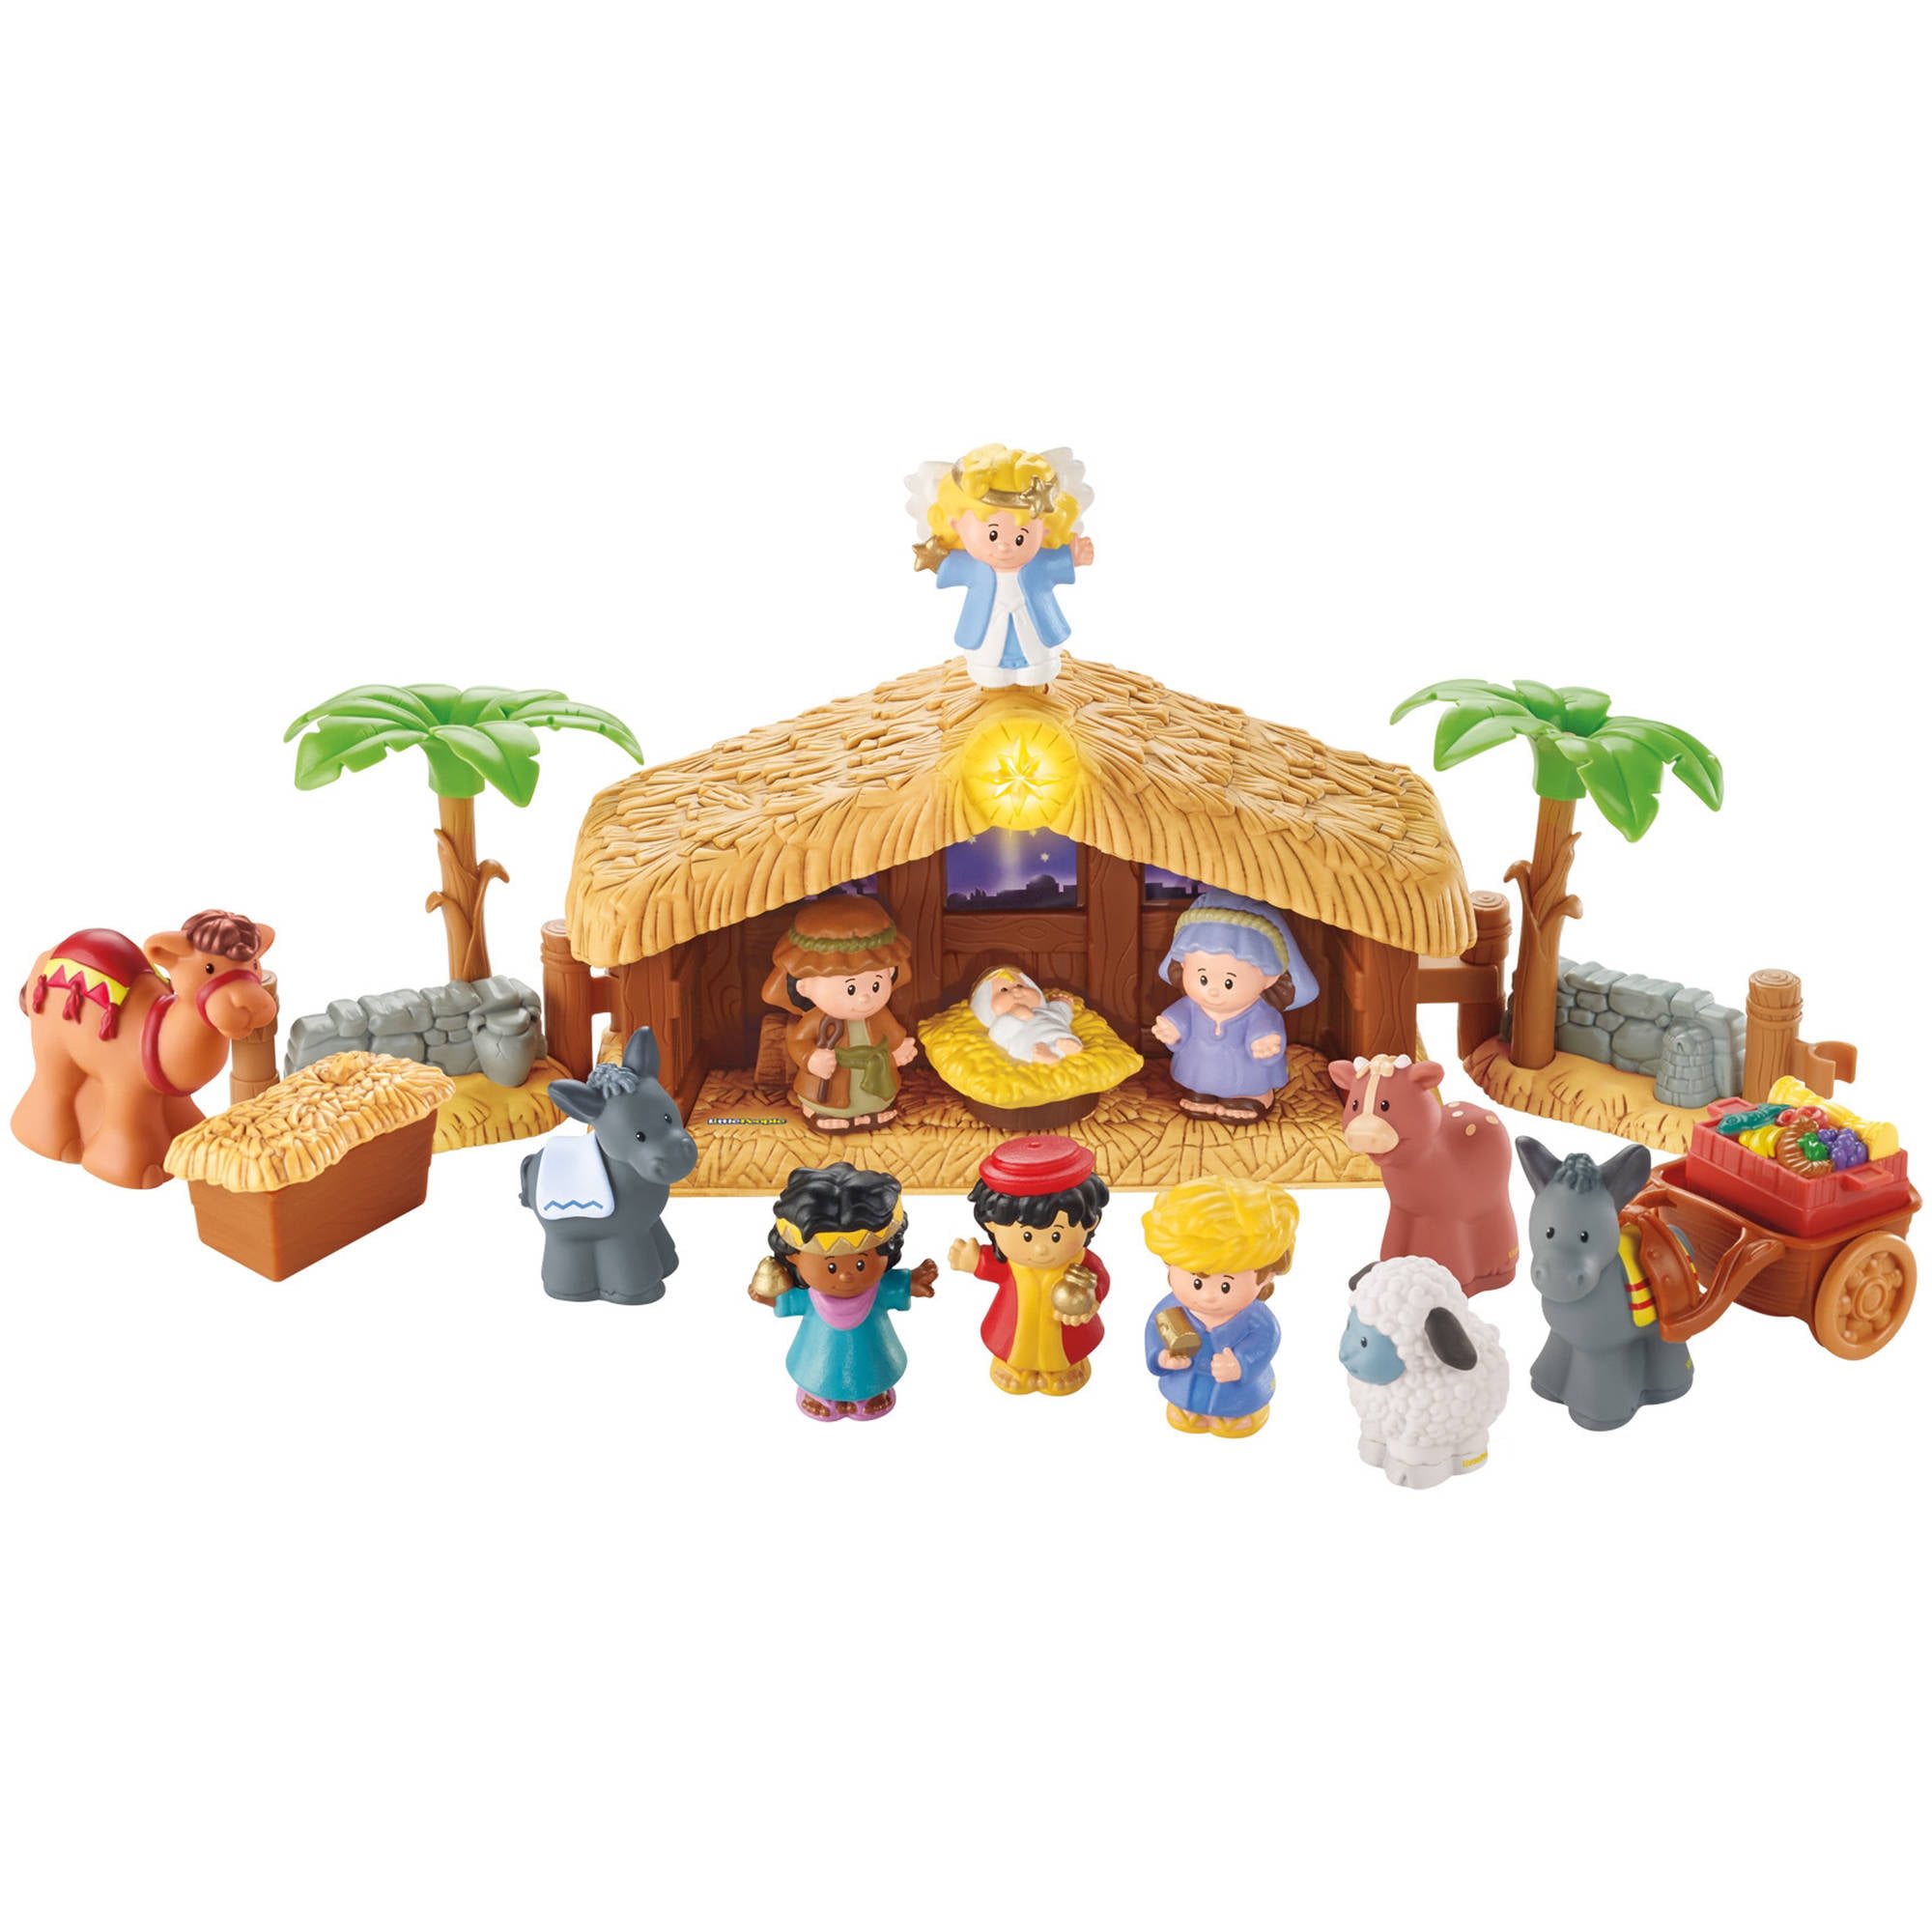 Fisher Price Little People BABY JESUS for Christmas Nativity Stable MANGER 